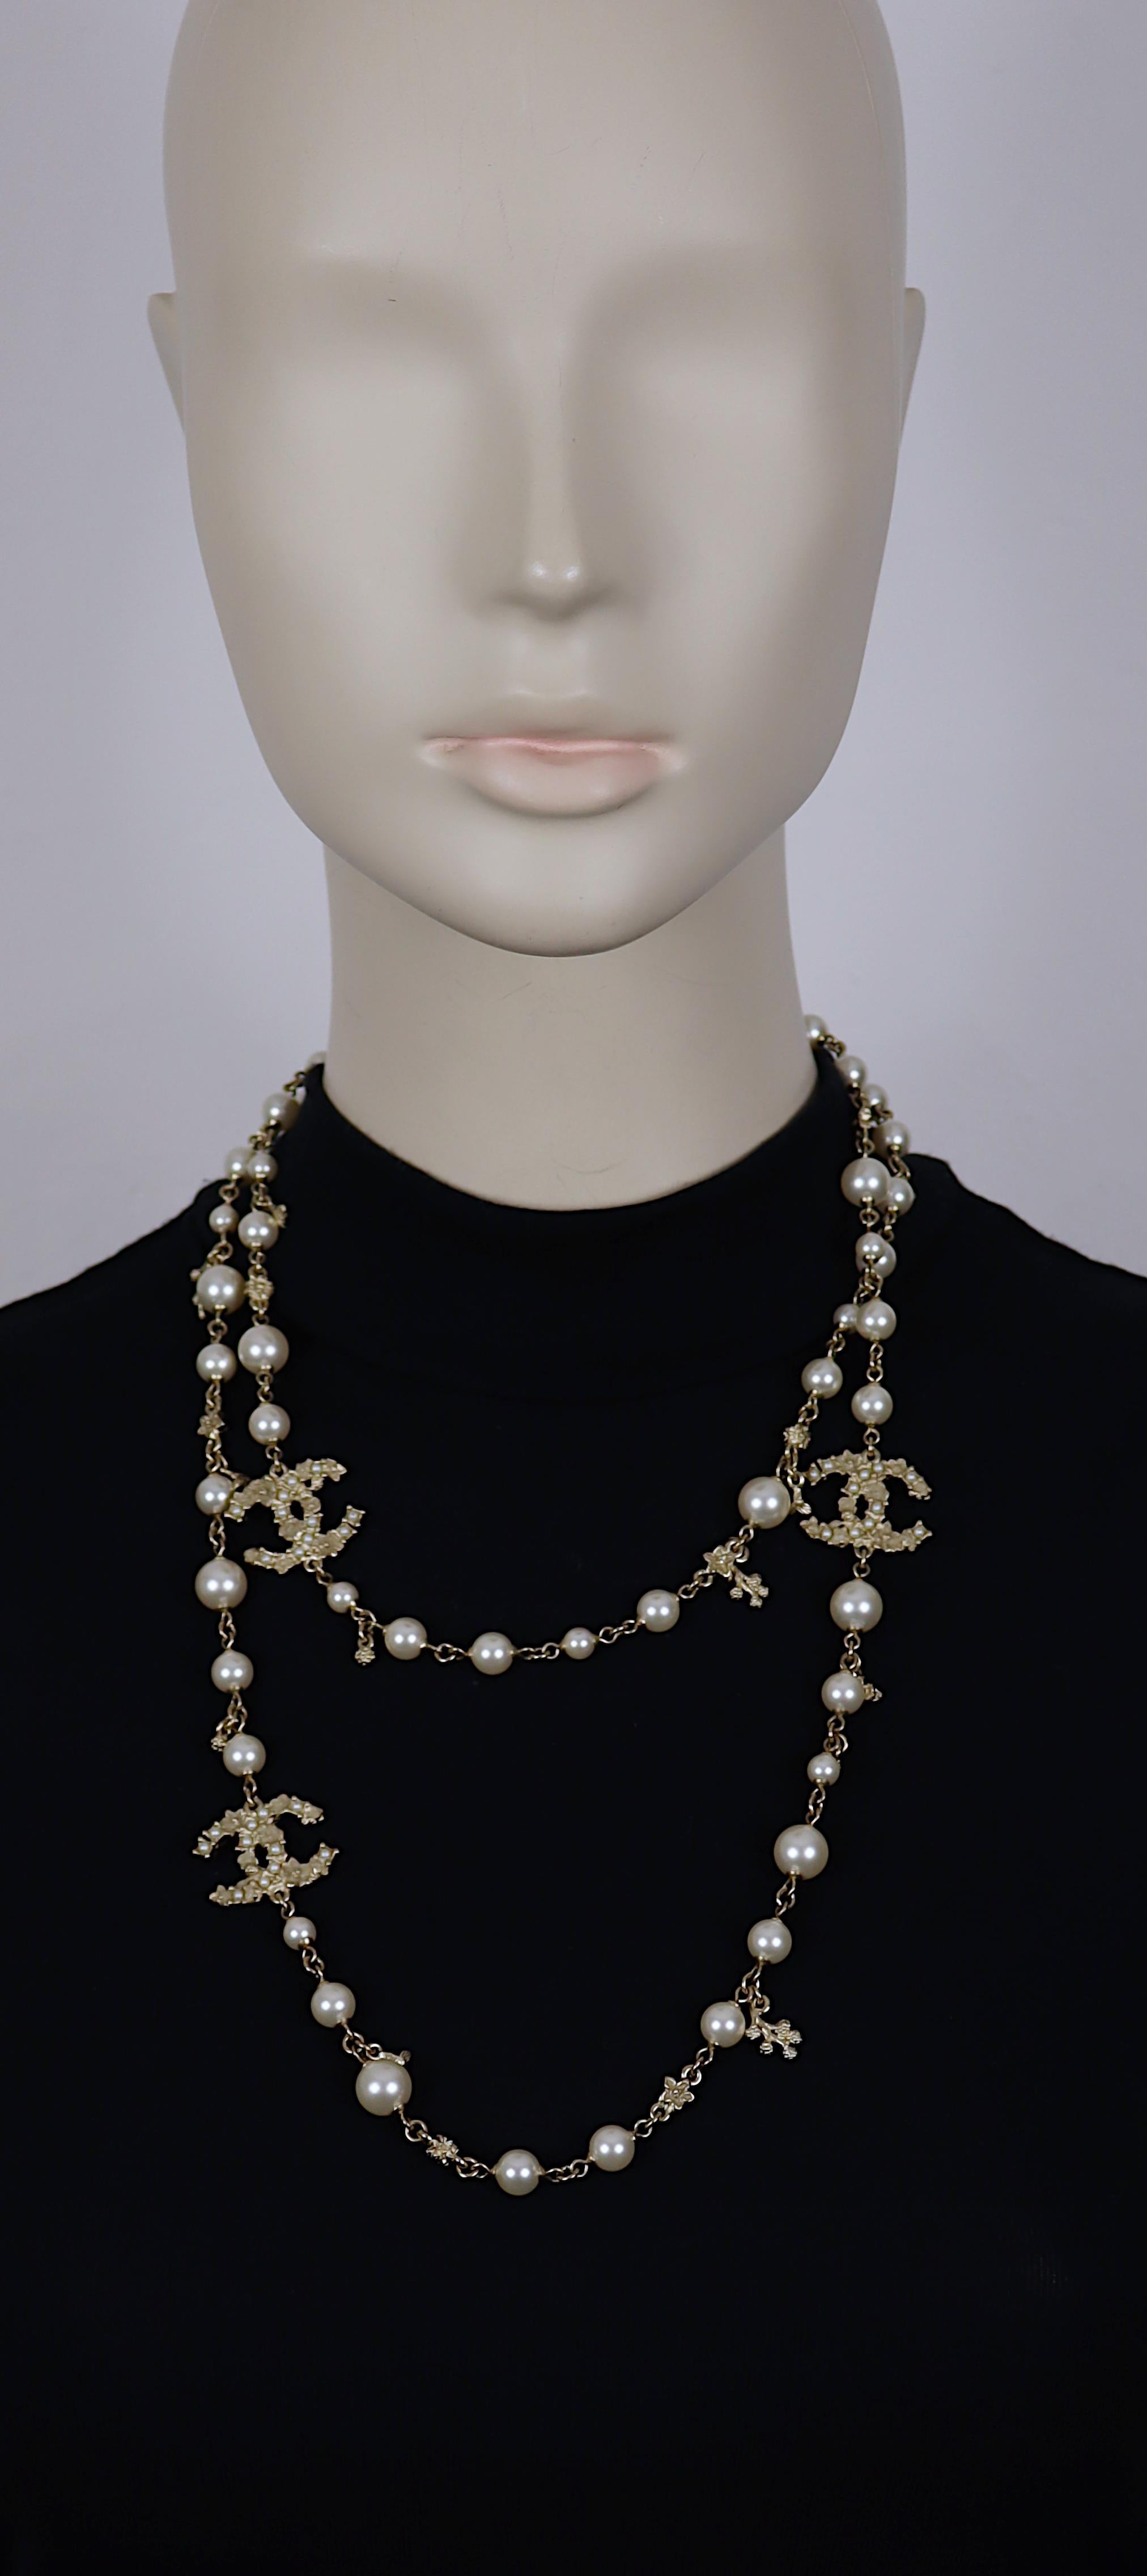 Women's CHANEL by KARL LAGERFELD Faux Pearl CC Logo Necklace, 2012 For Sale